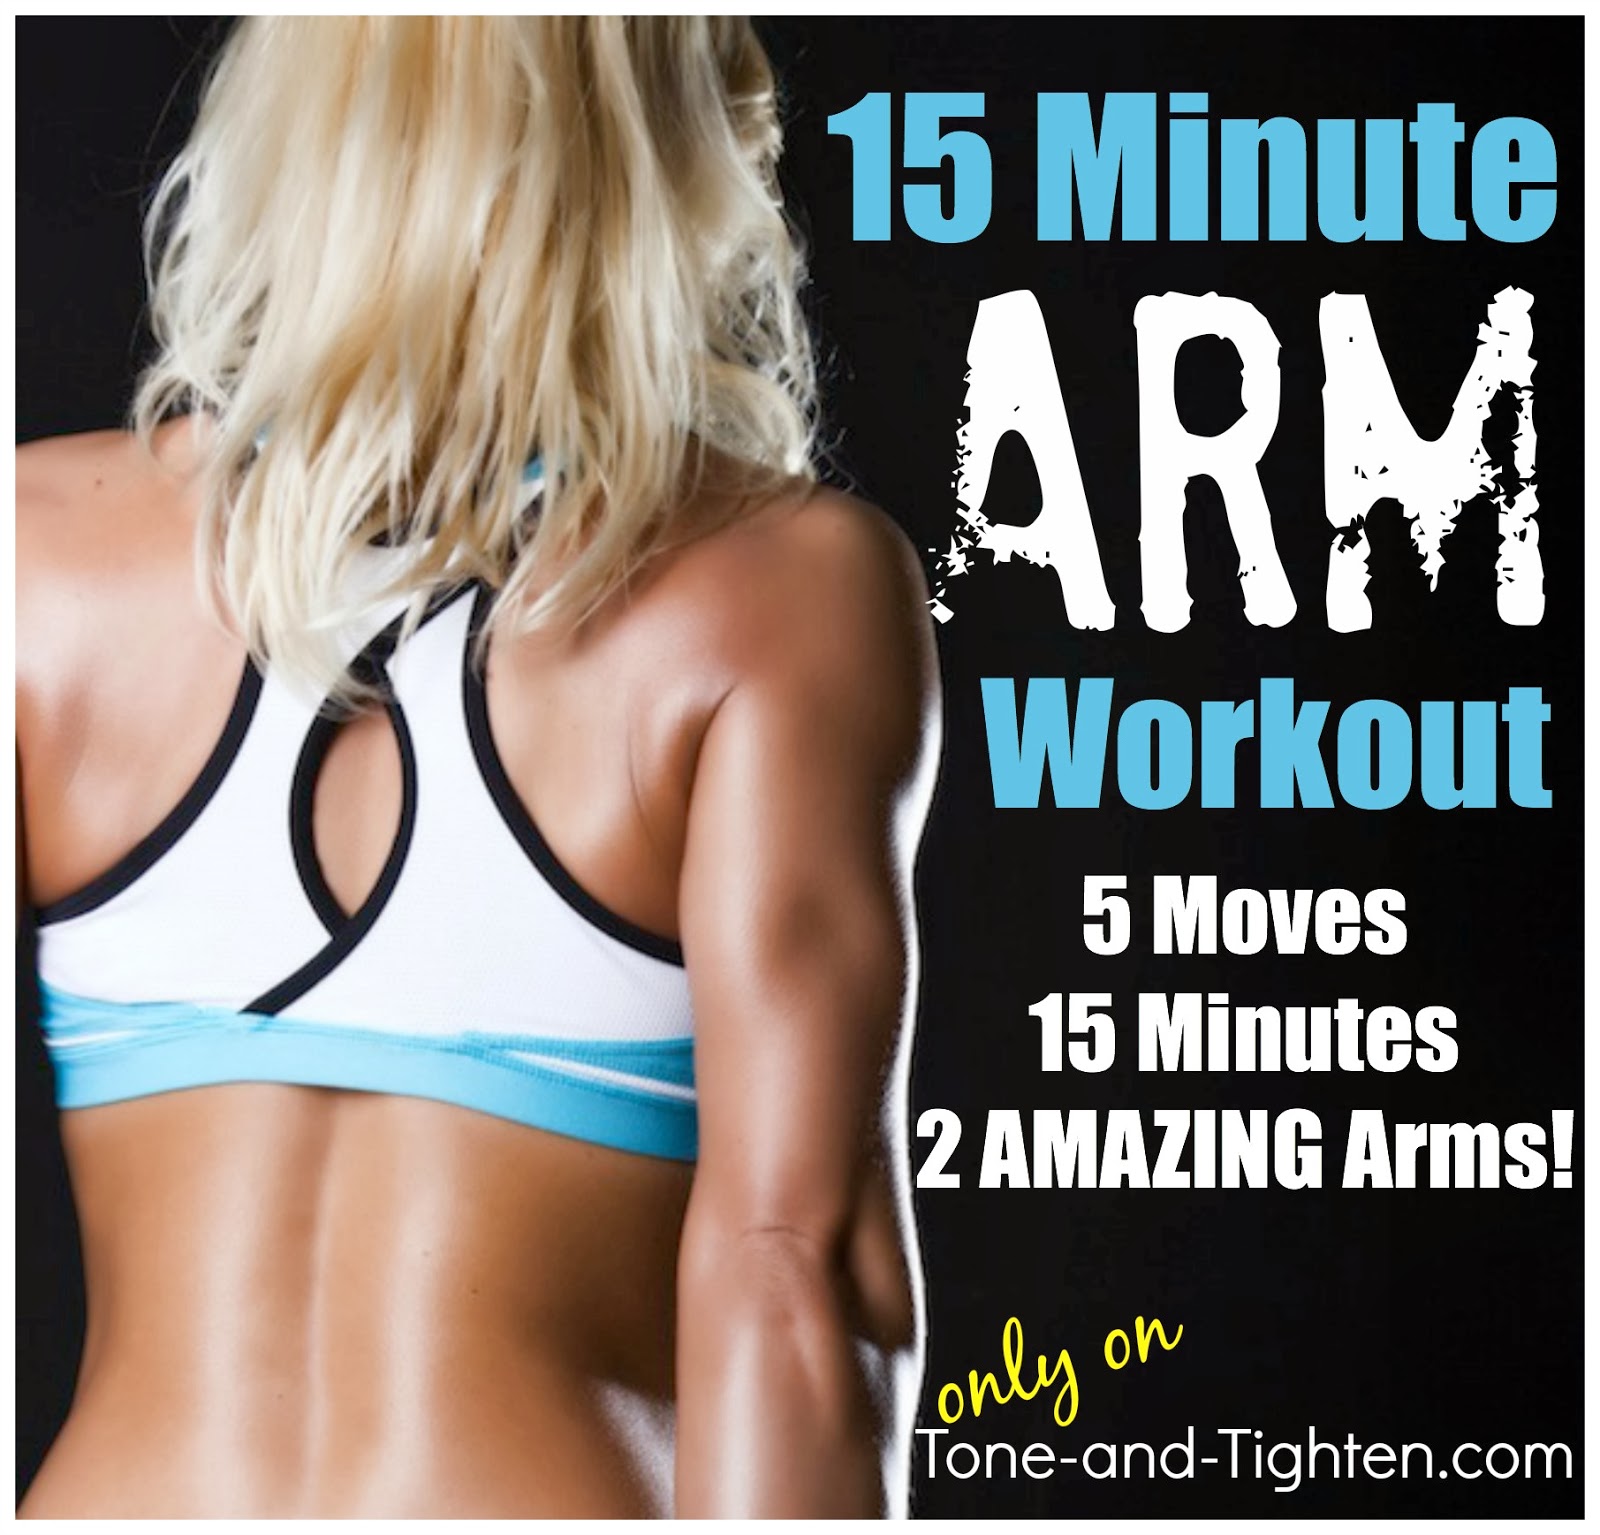 15 Minute At-Home Arm Workout – Sleek and sexy arms in no time!